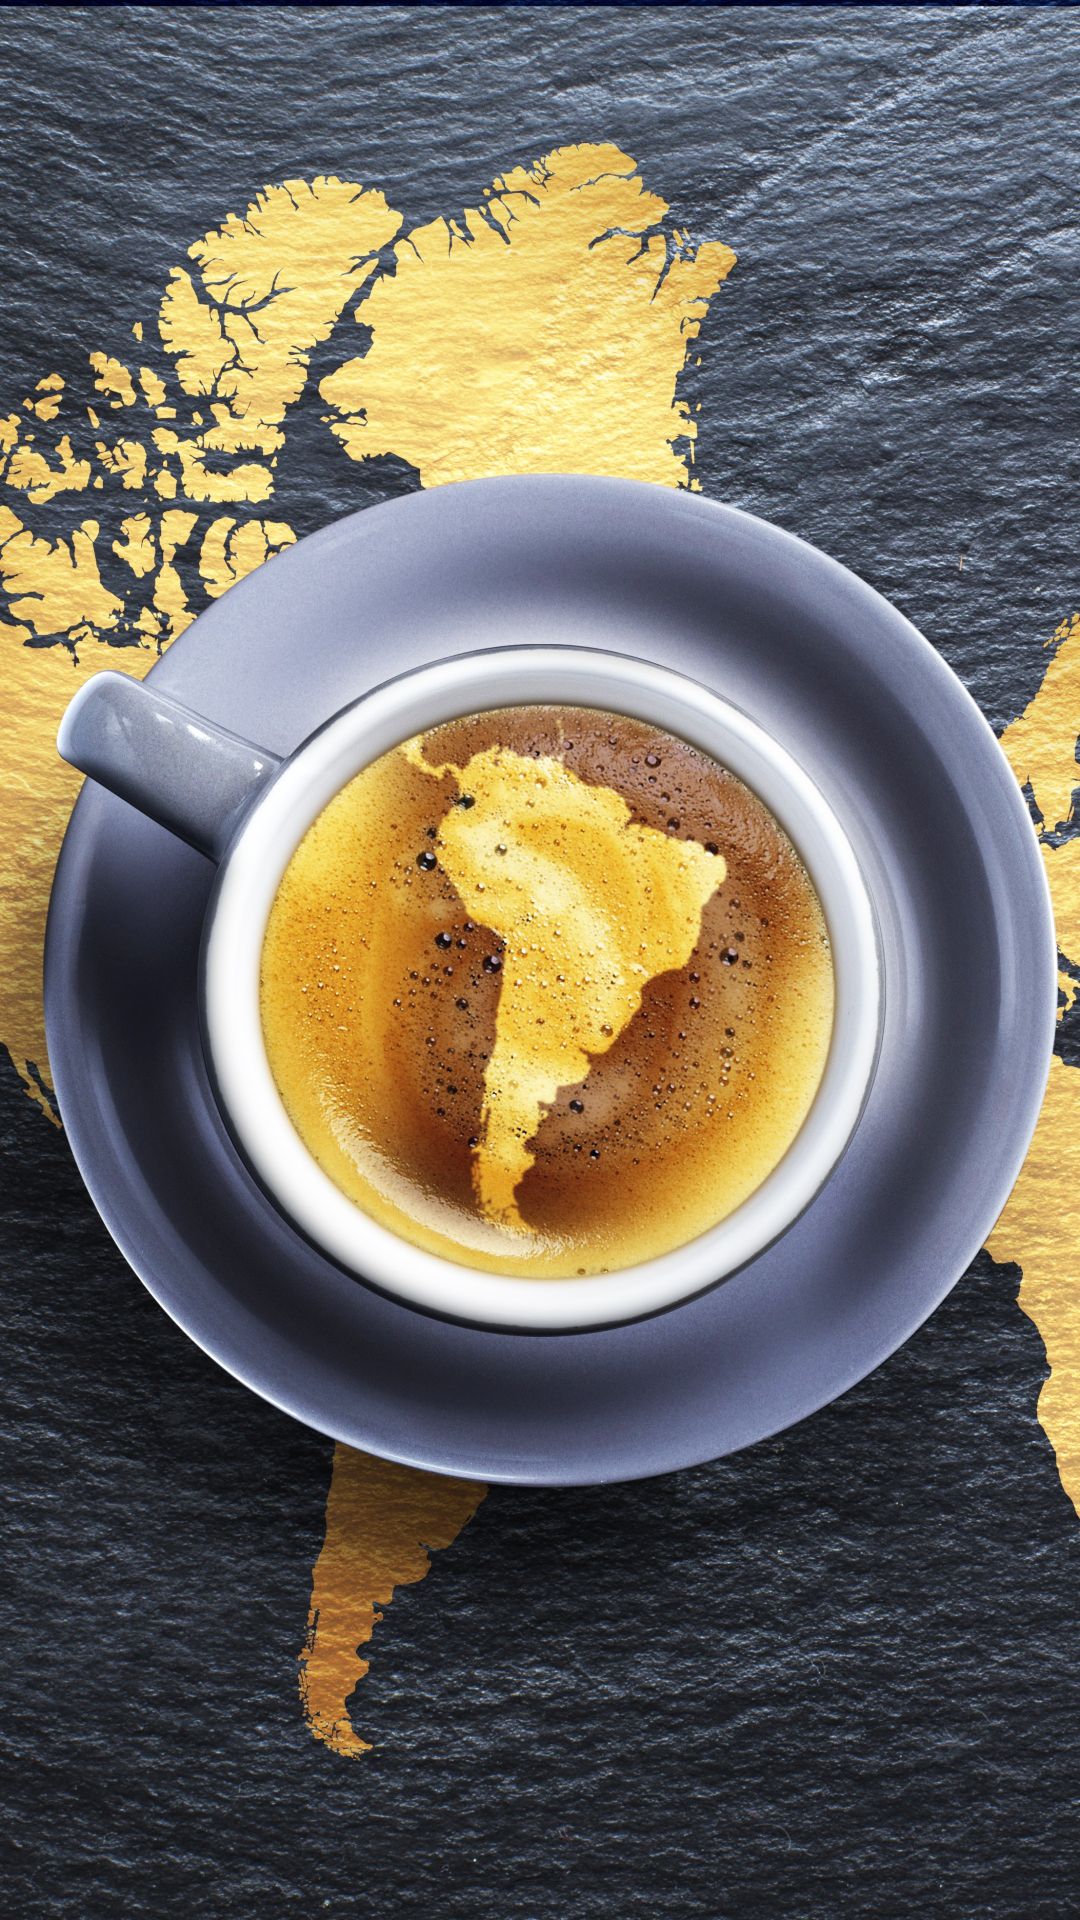 Coffee Africa South America Map Foam Android Wallpaper free download